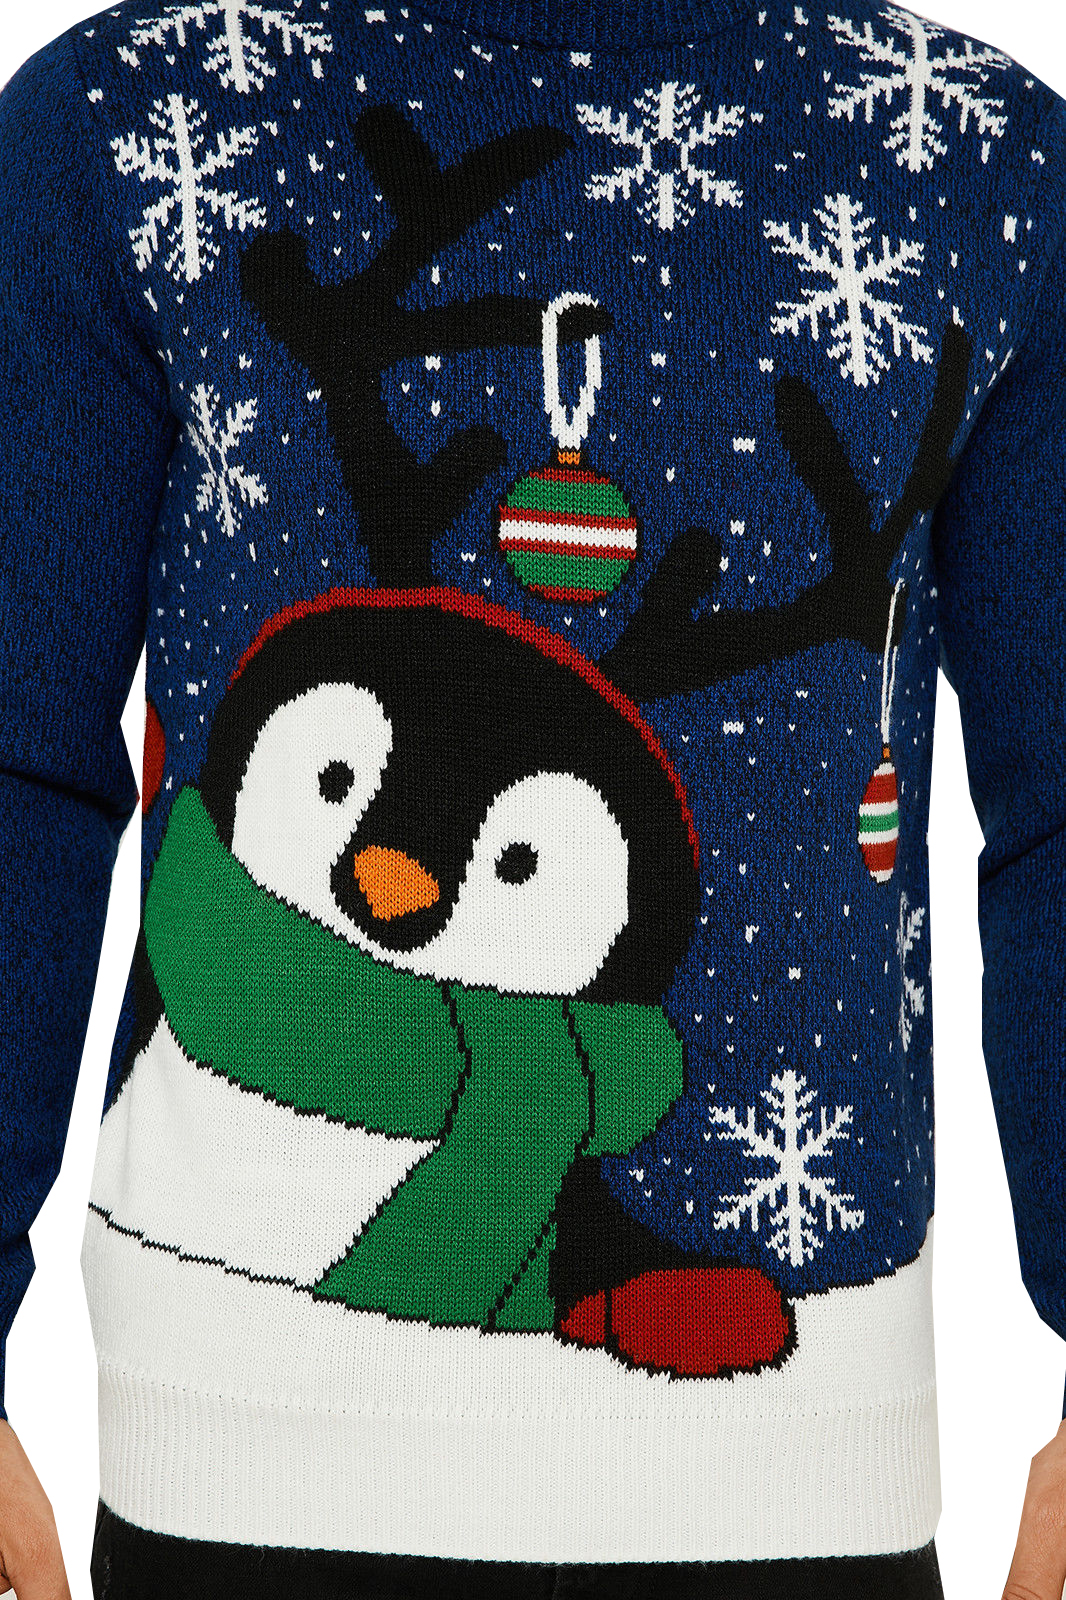 Threadbare Adults Festive Christmas Jumpers Novelty Xmas Thick Knitted ...